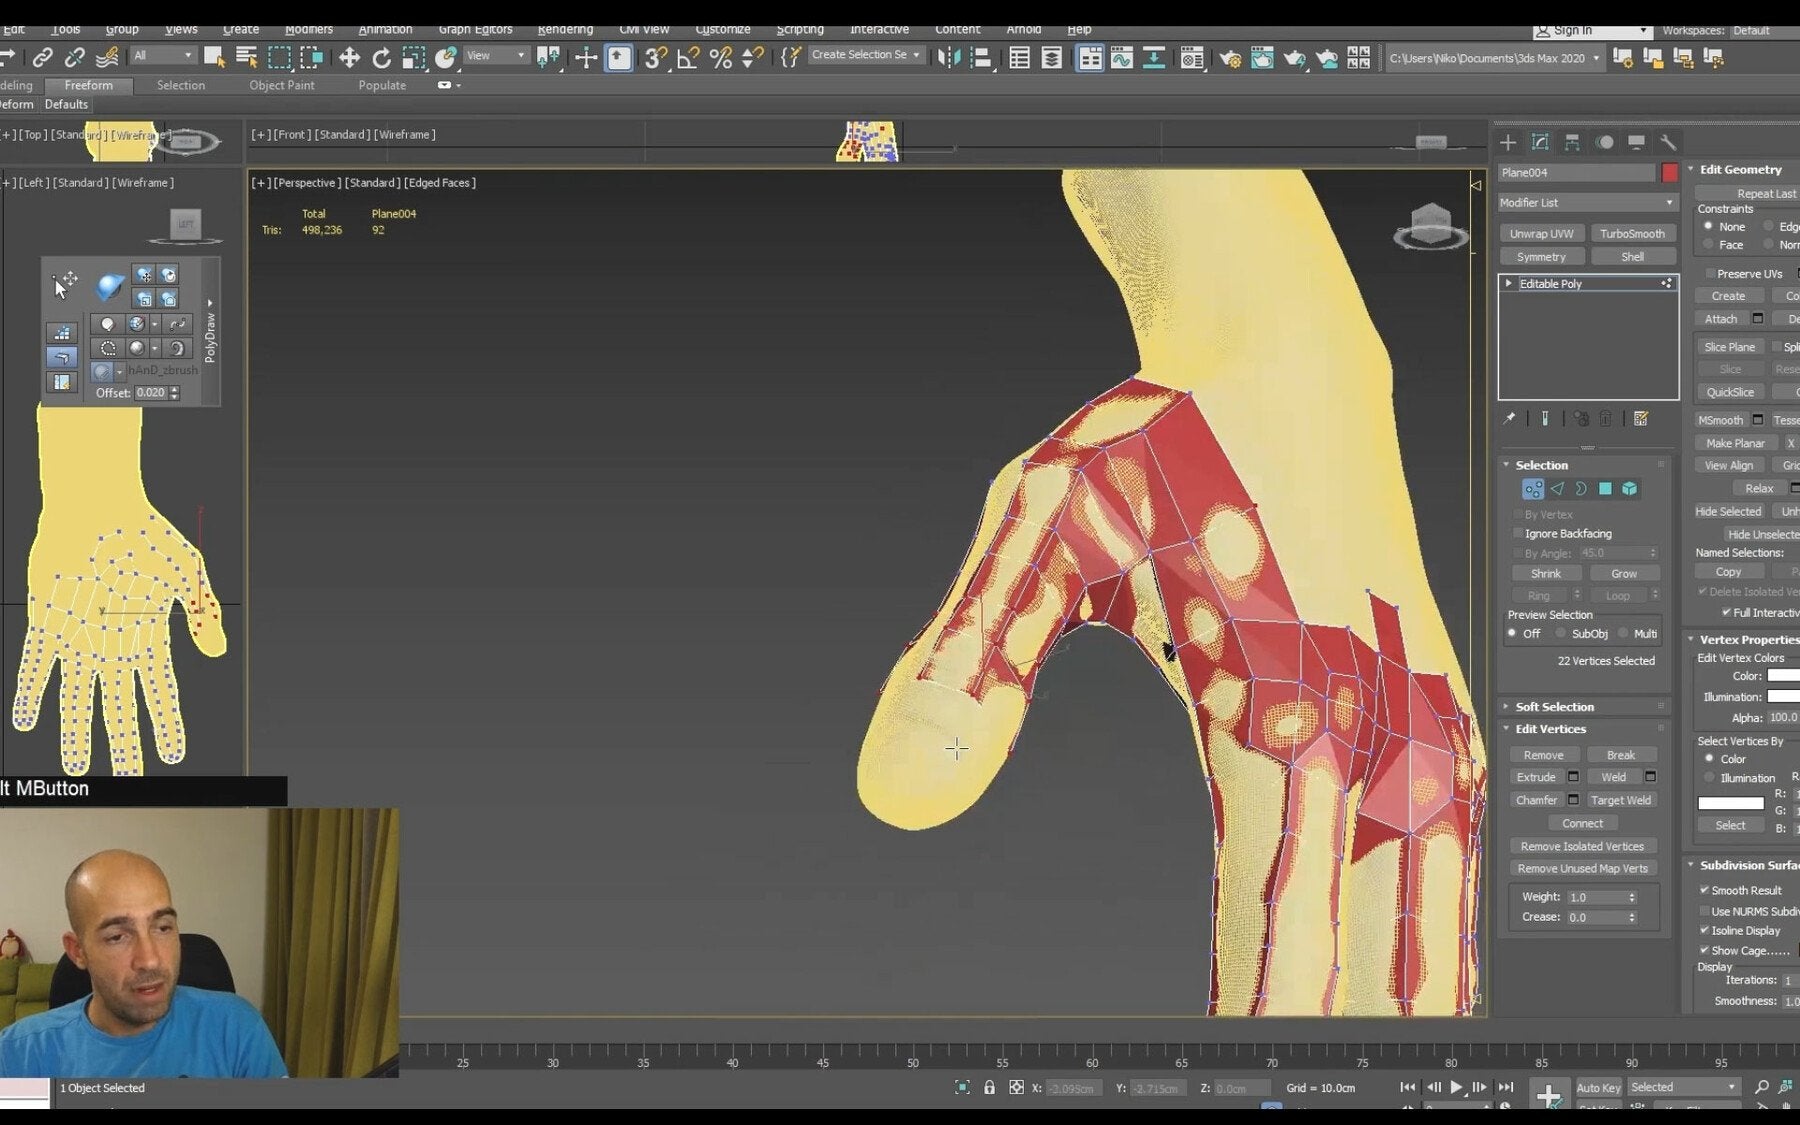 Retopology and UVs in 3Ds Max Course for Absolute Beginners